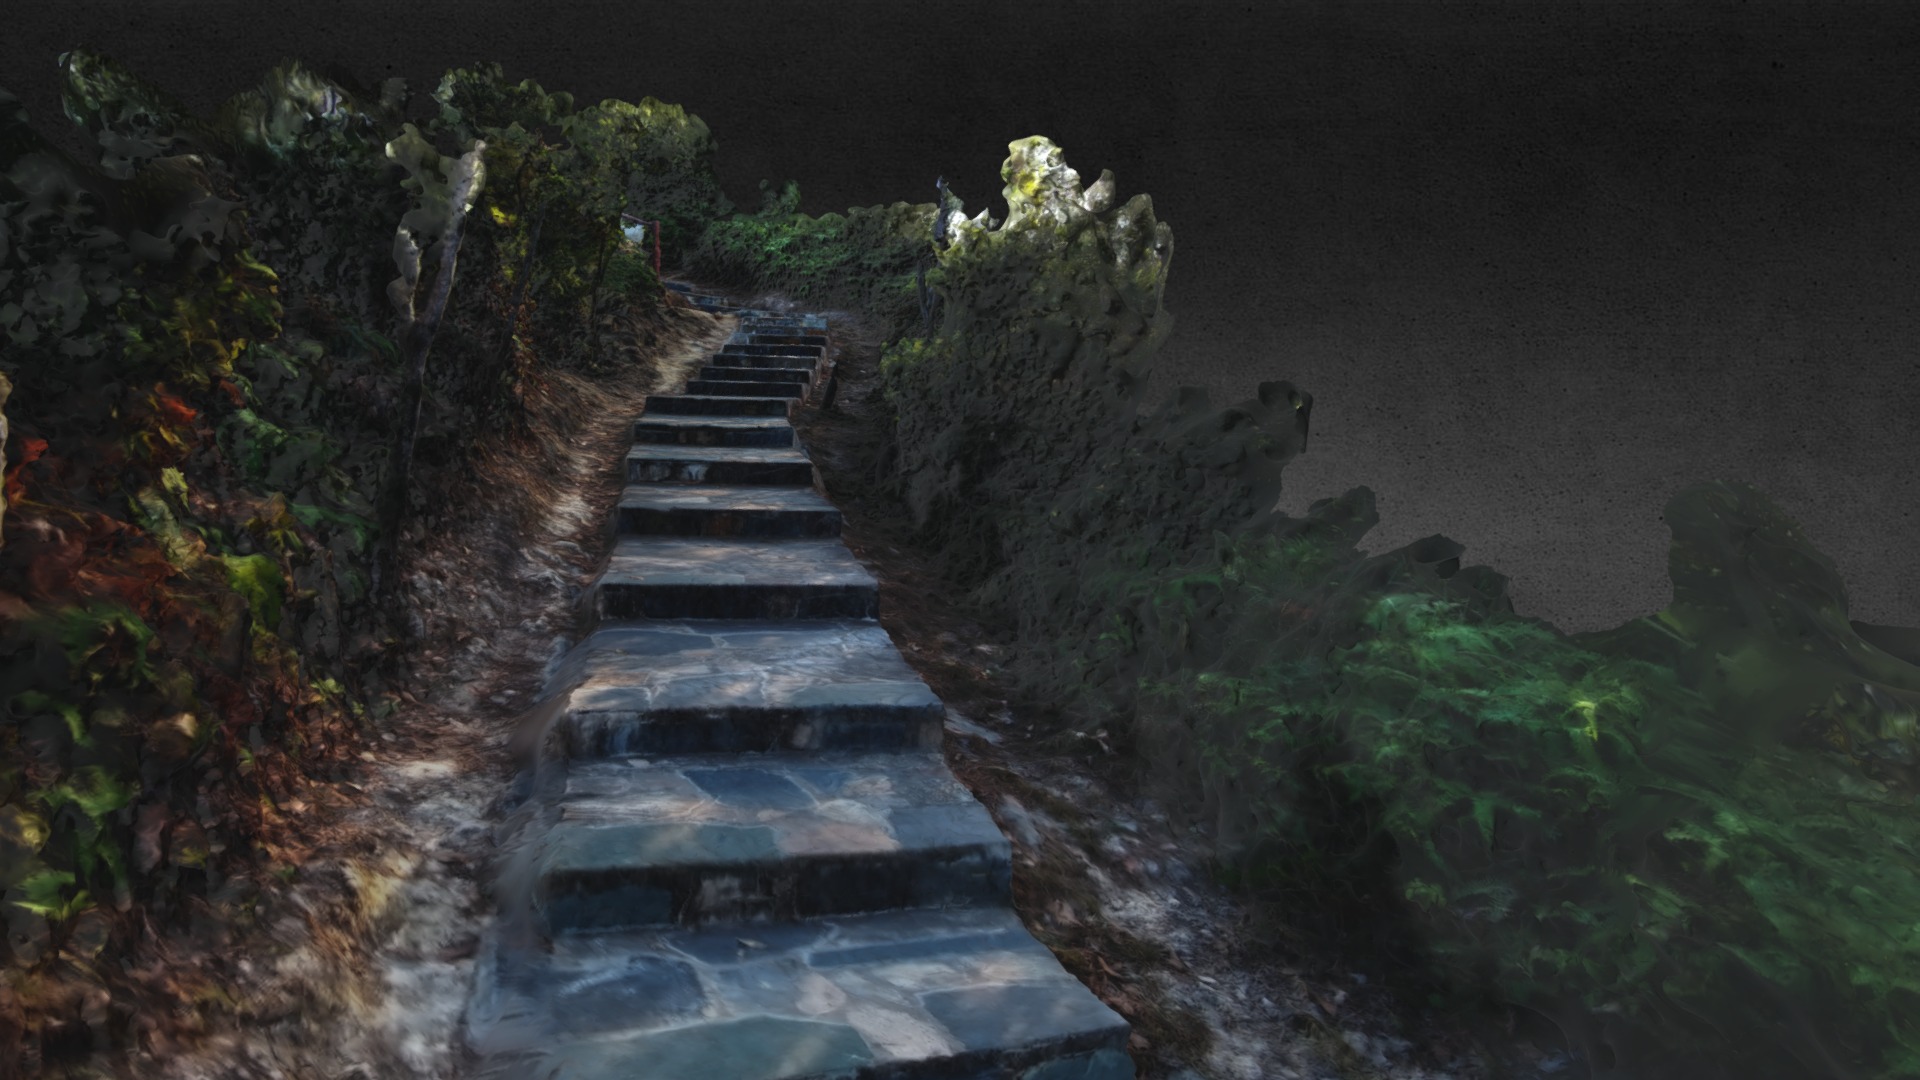 3D model Hike Stairs 2019.11.24 - This is a 3D model of the Hike Stairs 2019.11.24. The 3D model is about a stone staircase in a forest.